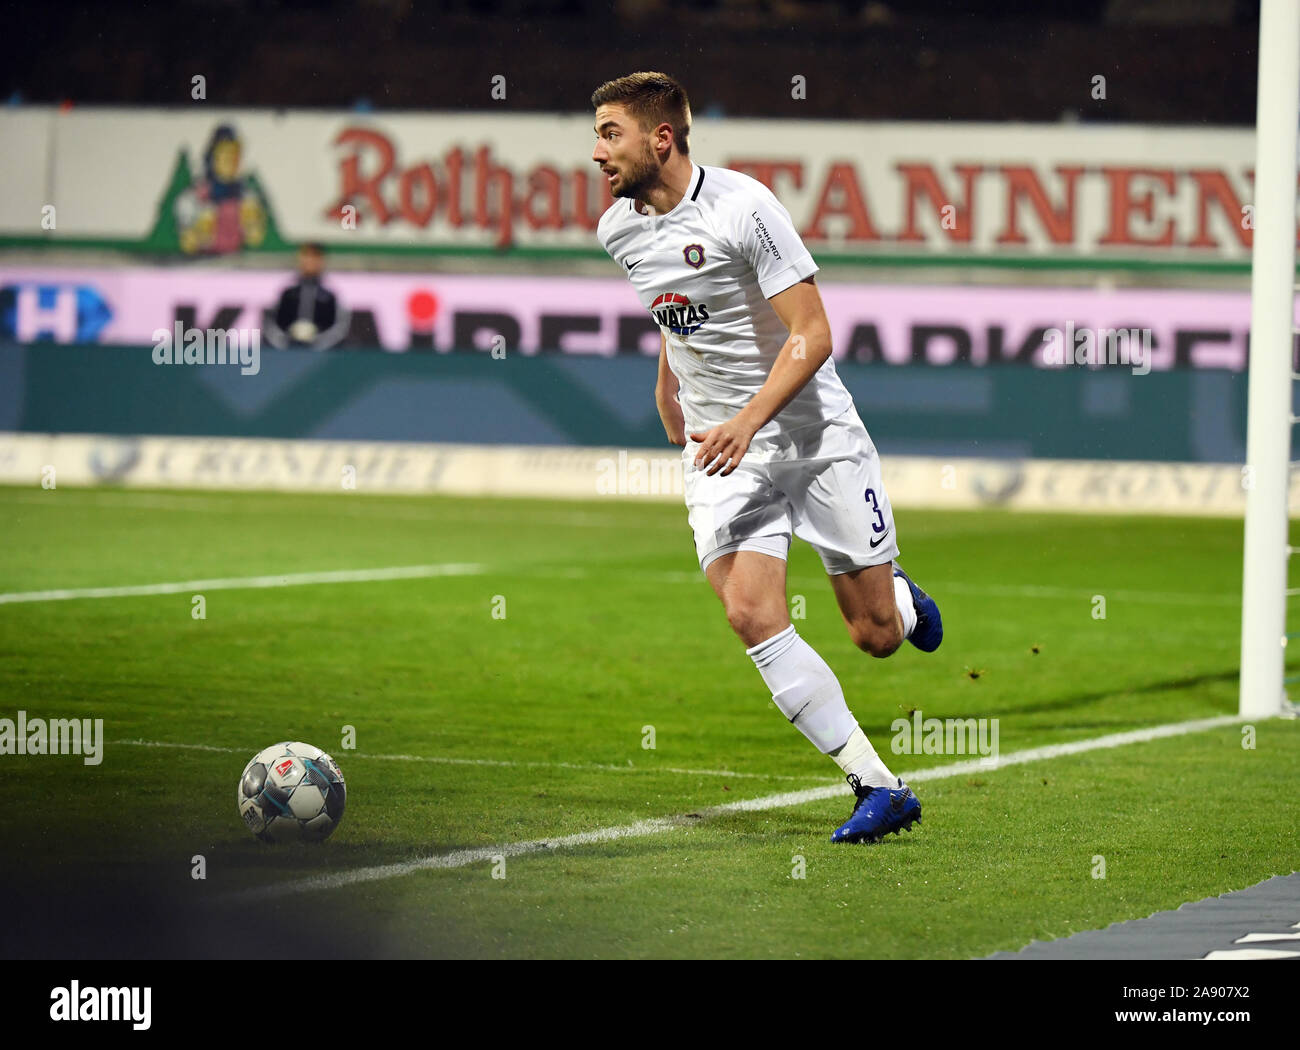 Karlsruhe, Germany. 11th Nov, 2019. Soccer: 2nd Bundesliga, Karlsruher SC - Erzgebirge Aue, 13th matchday in the Wildparkstadion. Auer Marko Mihojevic. Credit: Uli Deck/dpa - IMPORTANT NOTE: In accordance with the requirements of the DFL Deutsche Fußball Liga or the DFB Deutscher Fußball-Bund, it is prohibited to use or have used photographs taken in the stadium and/or the match in the form of sequence images and/or video-like photo sequences./dpa/Alamy Live News Stock Photo